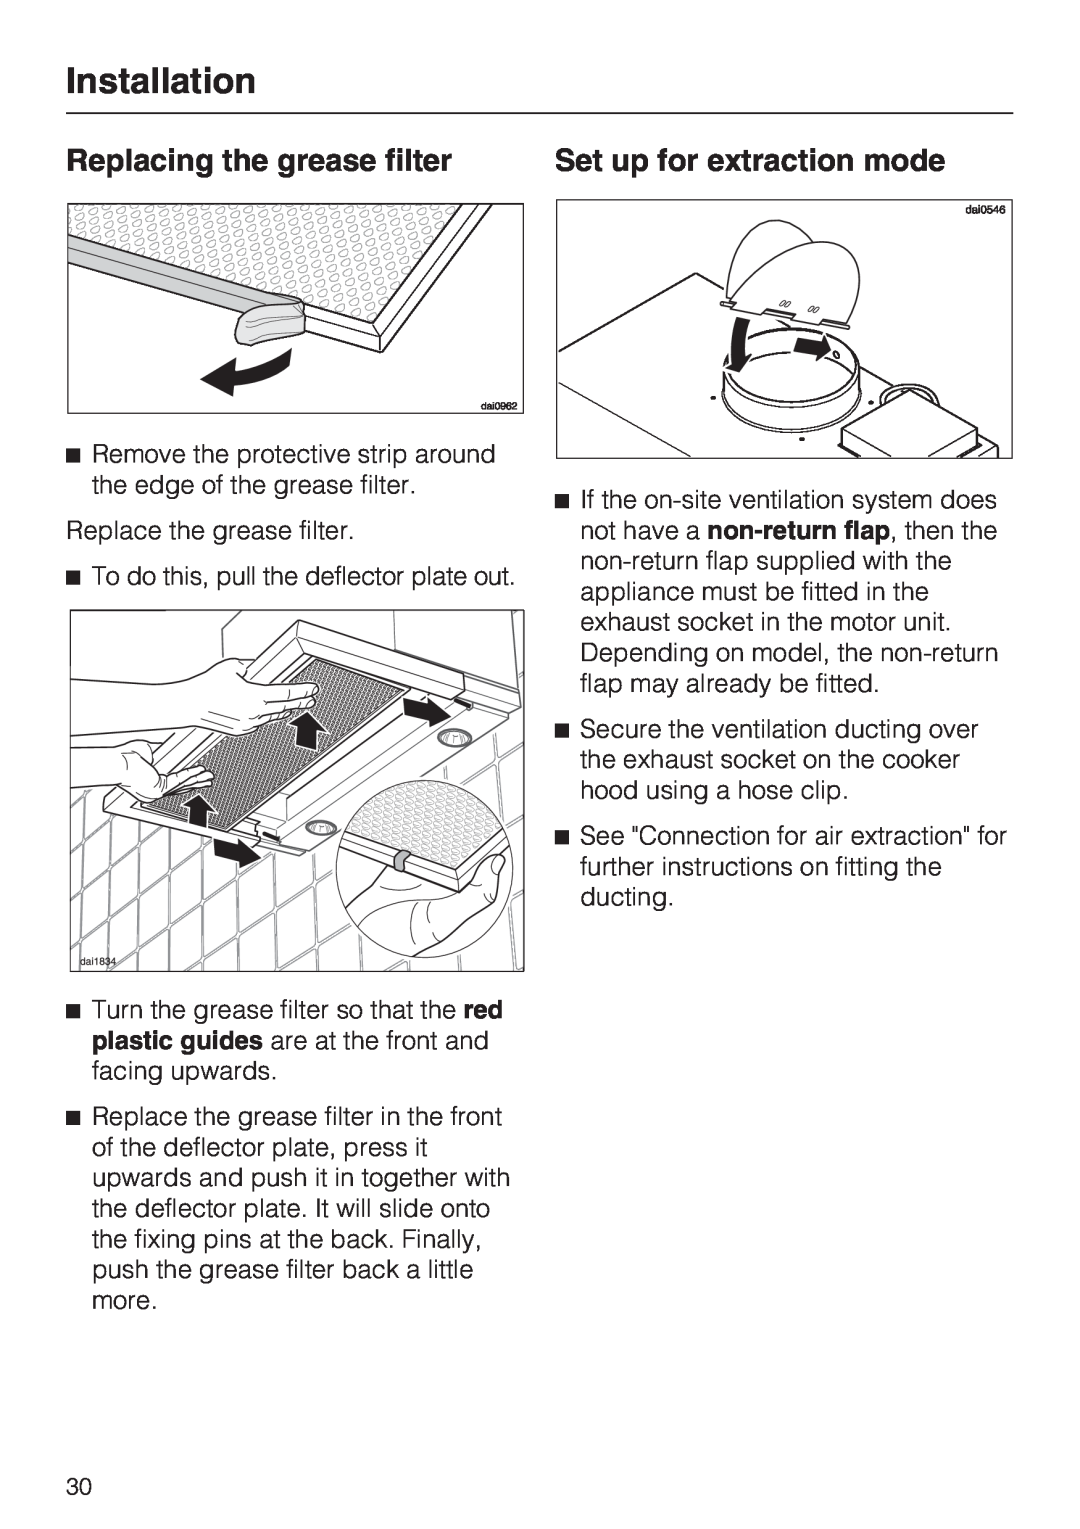 Miele DA 3190, DA 3160 installation instructions Replacing the grease filter, Set up for extraction mode, Installation 